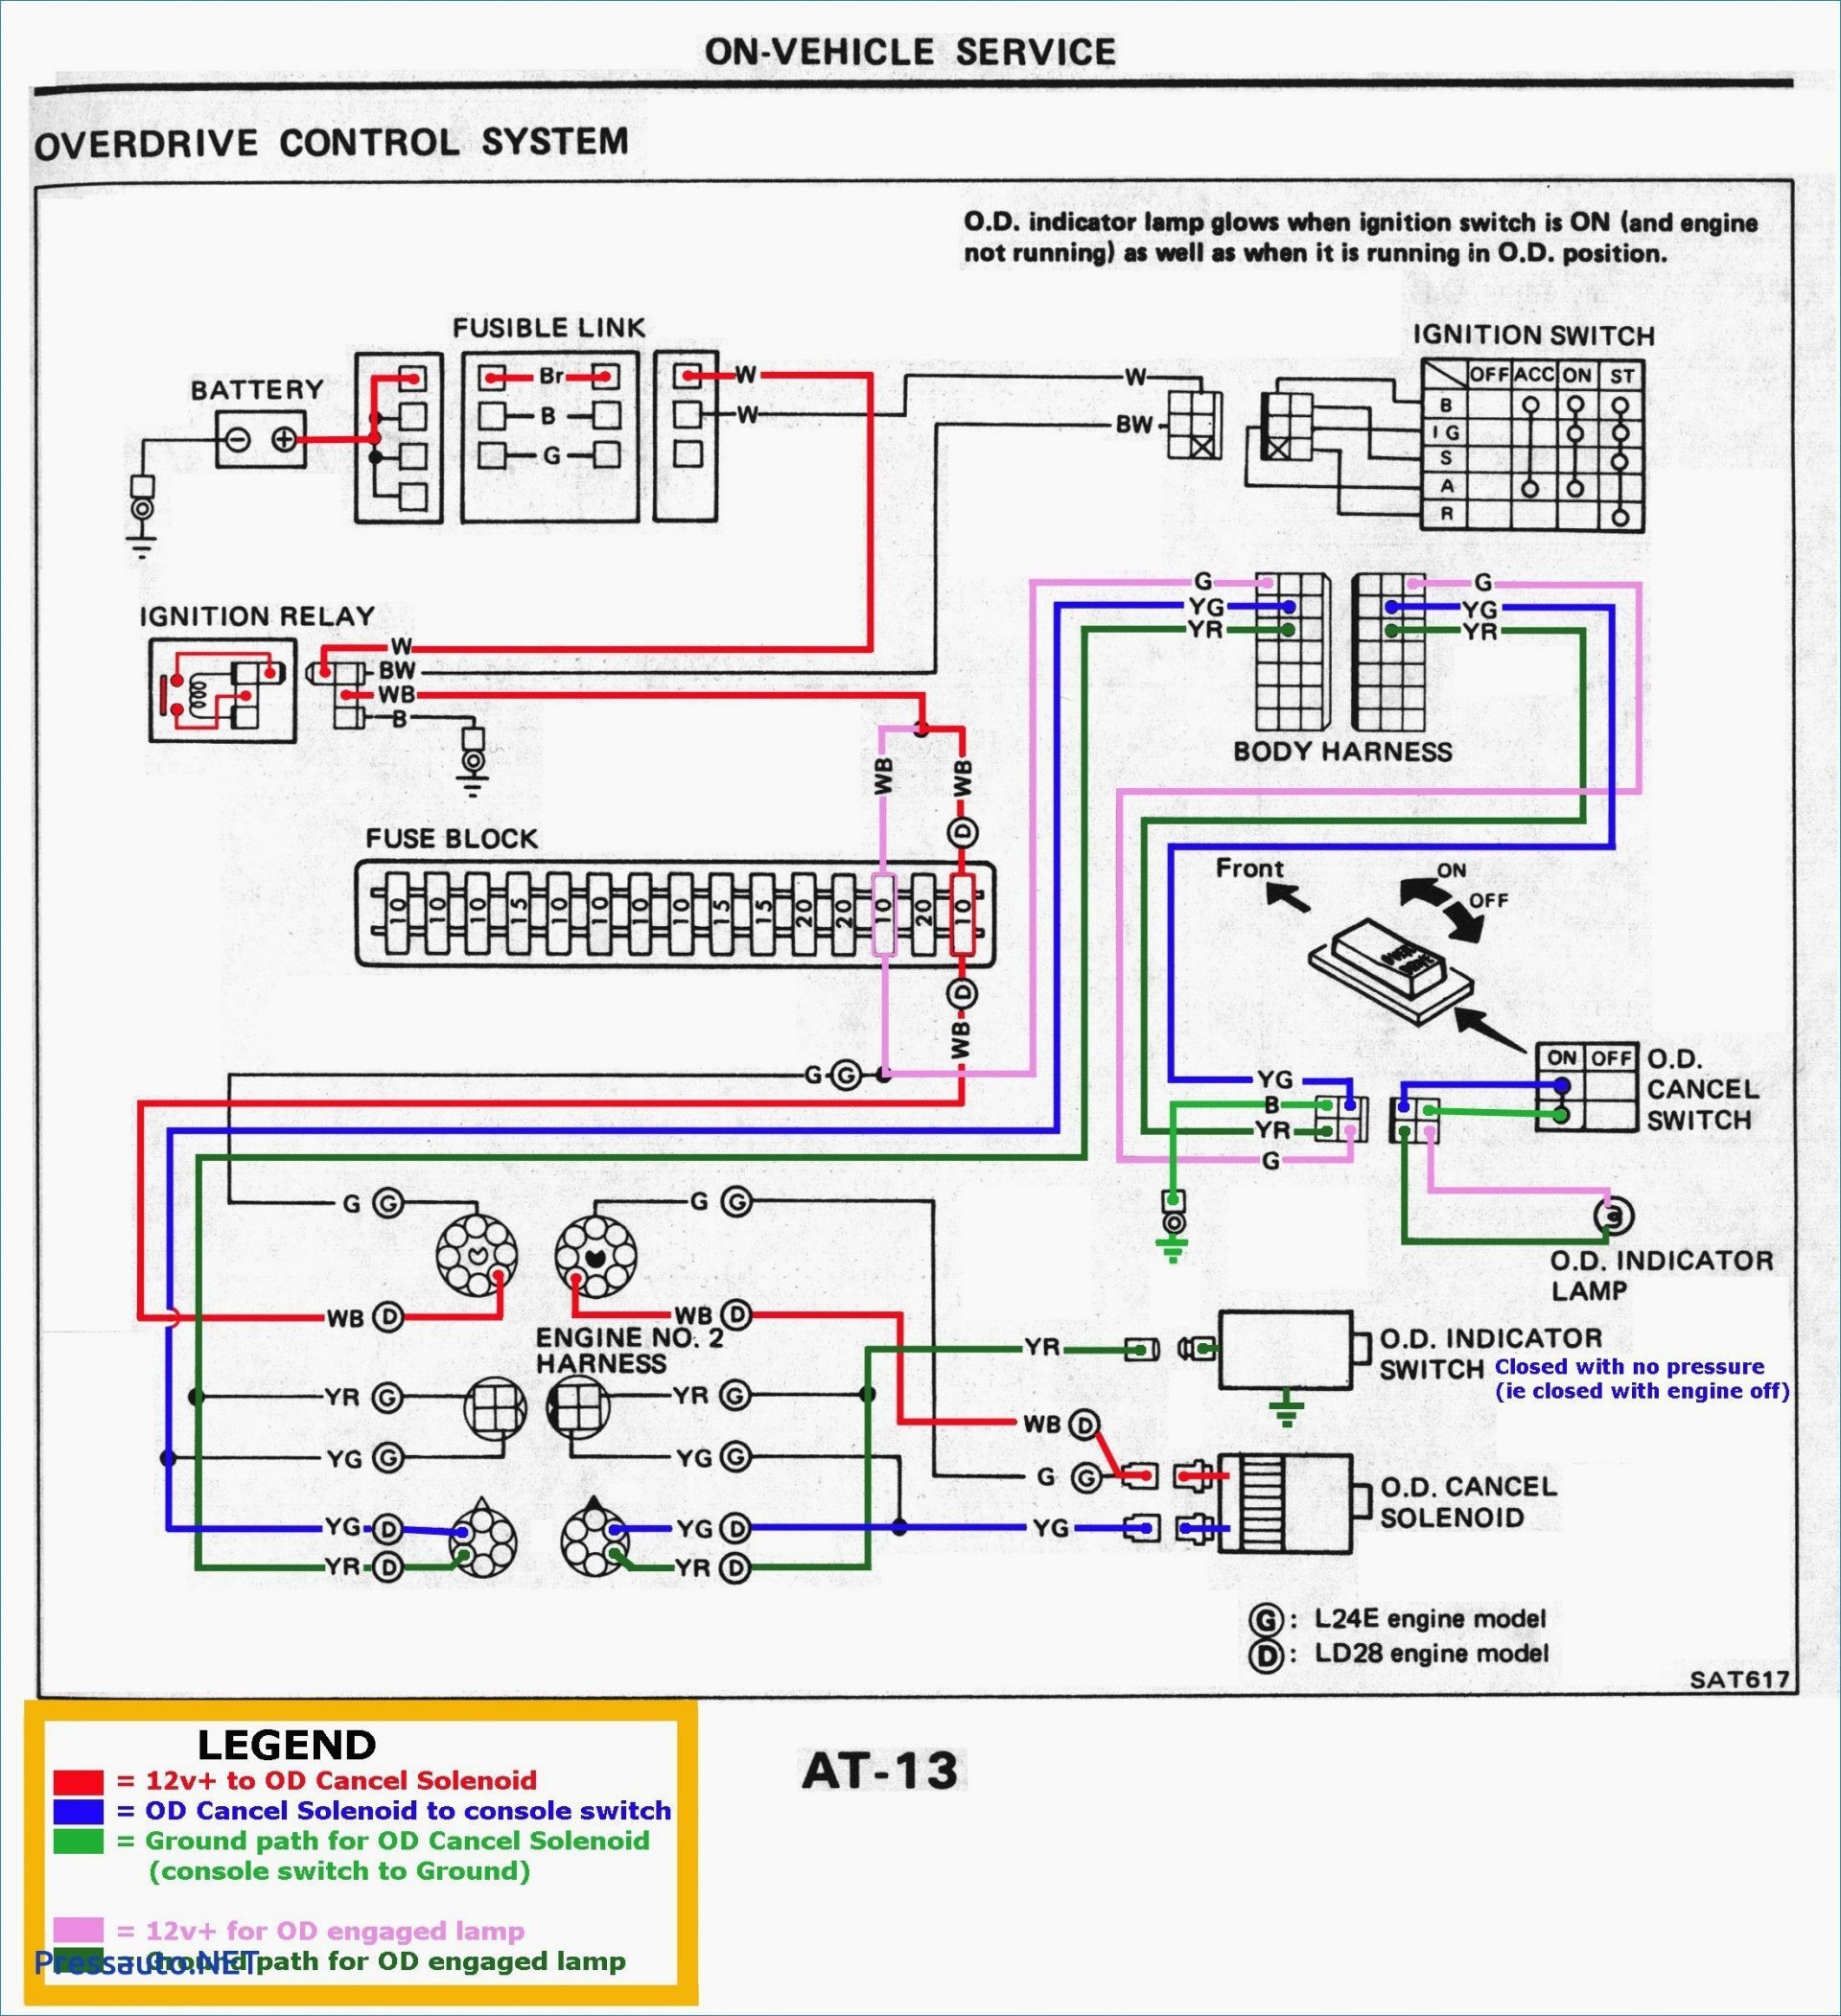 How To Wire Two Lights To e Switch Diagram 2018 Wiring Diagram For Two Lights E Switch 2018 Wiring Diagram For